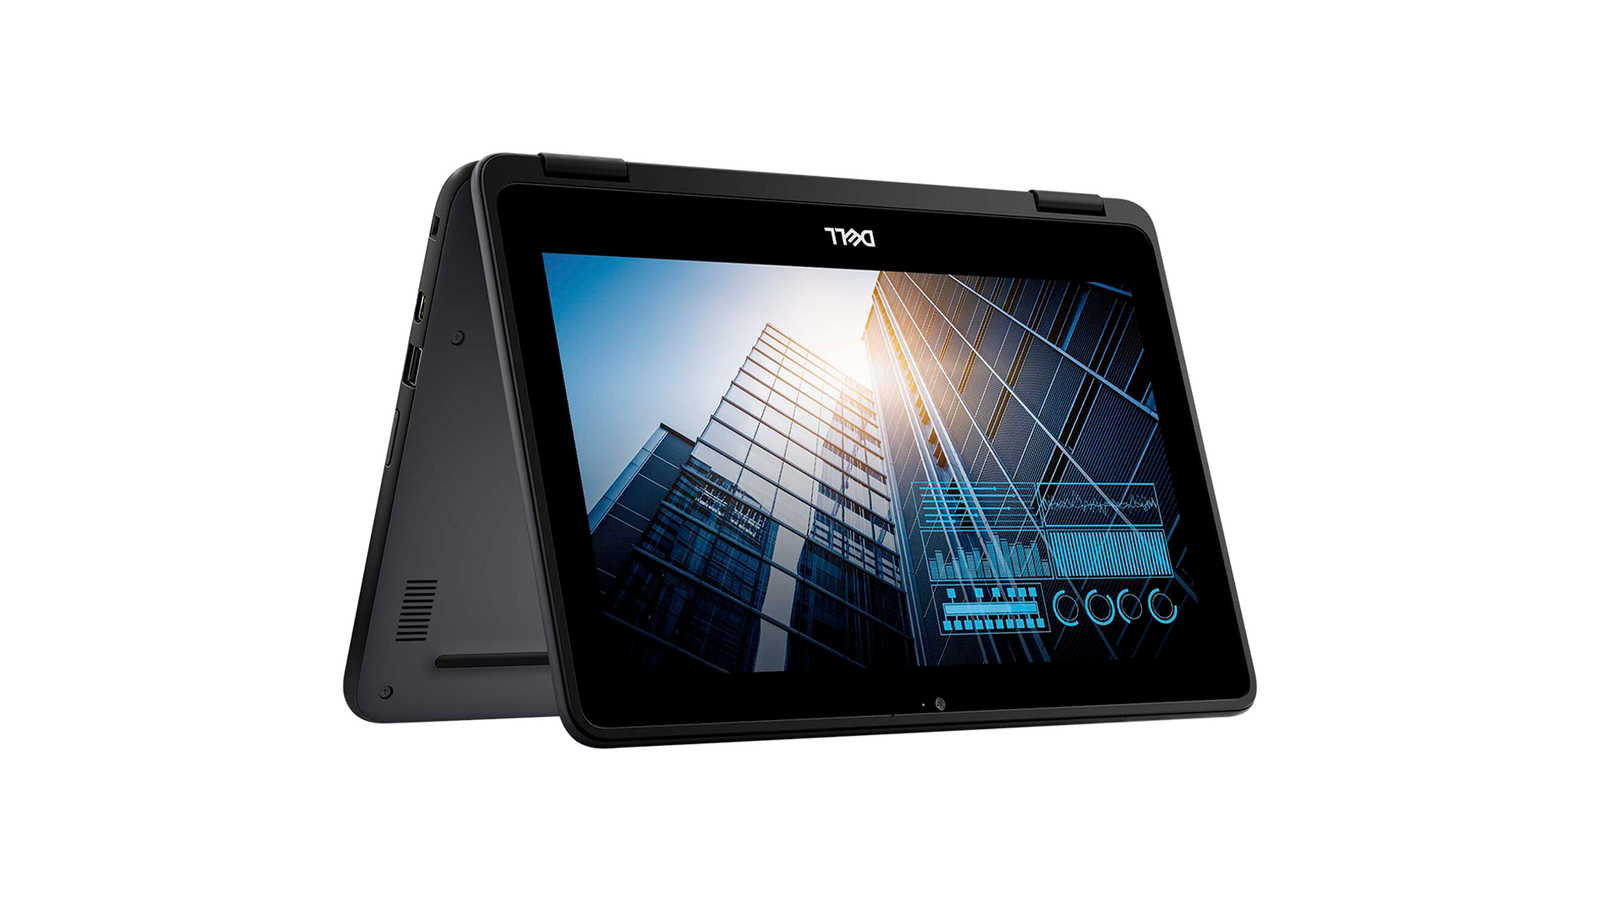 Dell Chromebook 3110 2-in-1 - A solid Chromebook for light users.